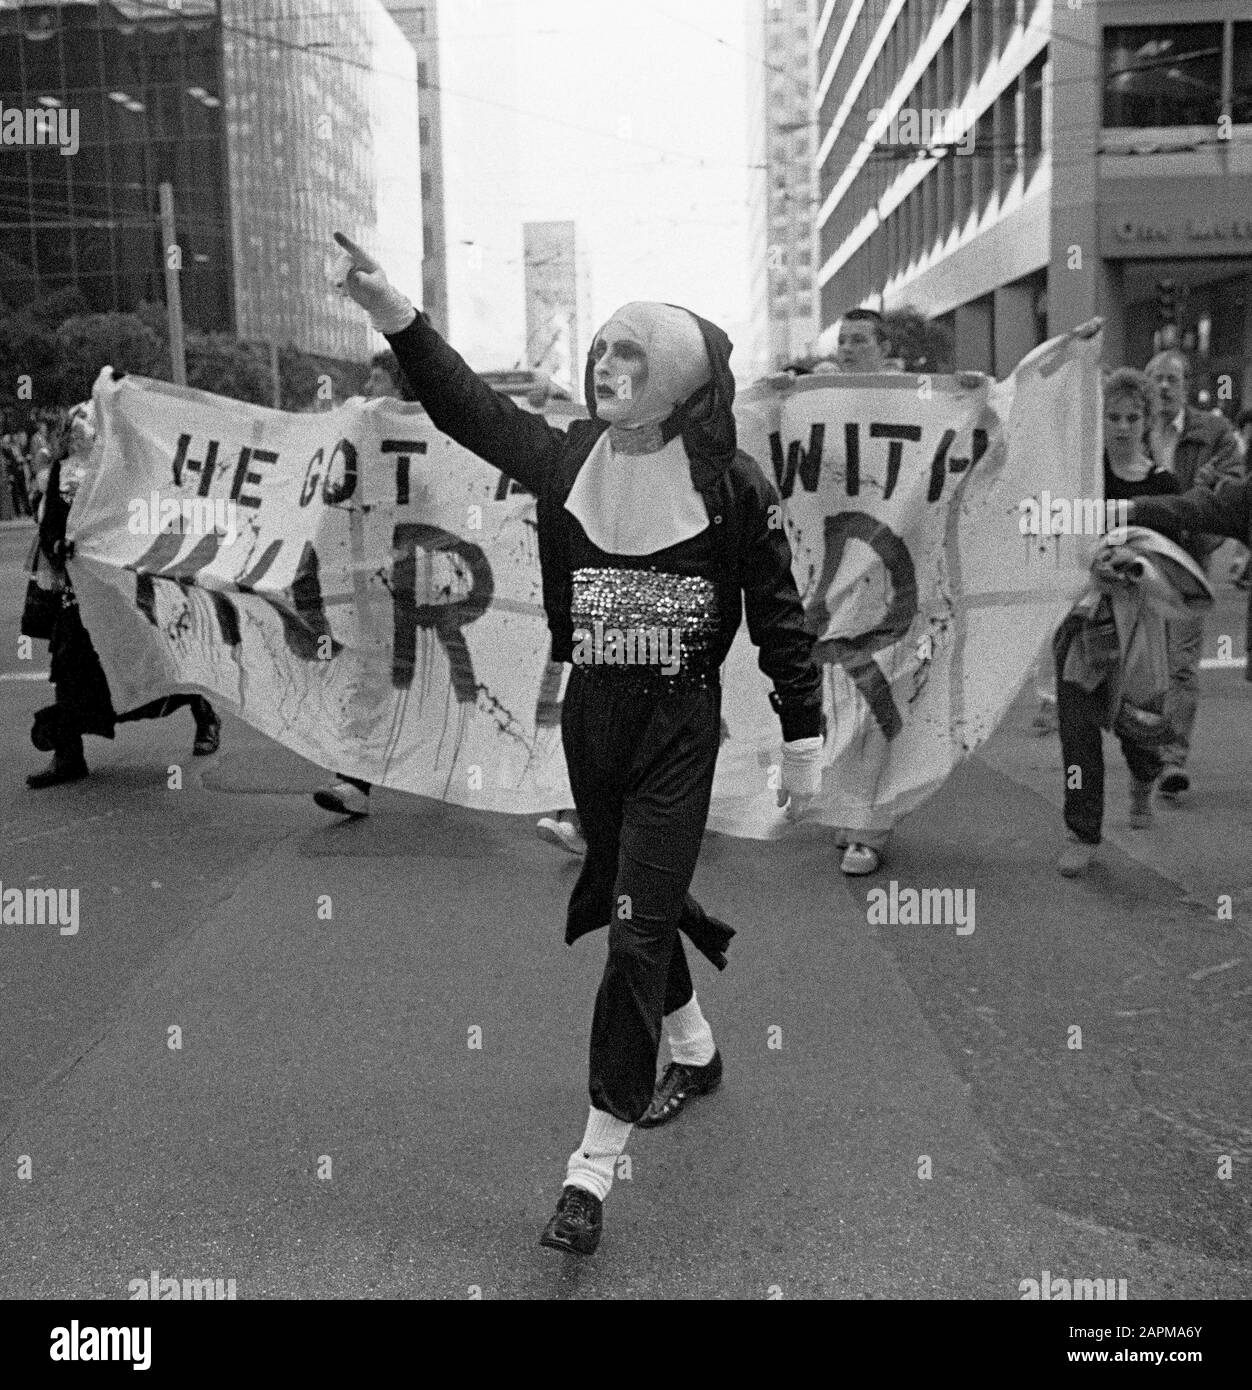 Demonstrators protesting the Milk Moscone assassinations murder verdic carry banner saying He got away with murder,  in San Francisco, California in late 70s Stock Photo